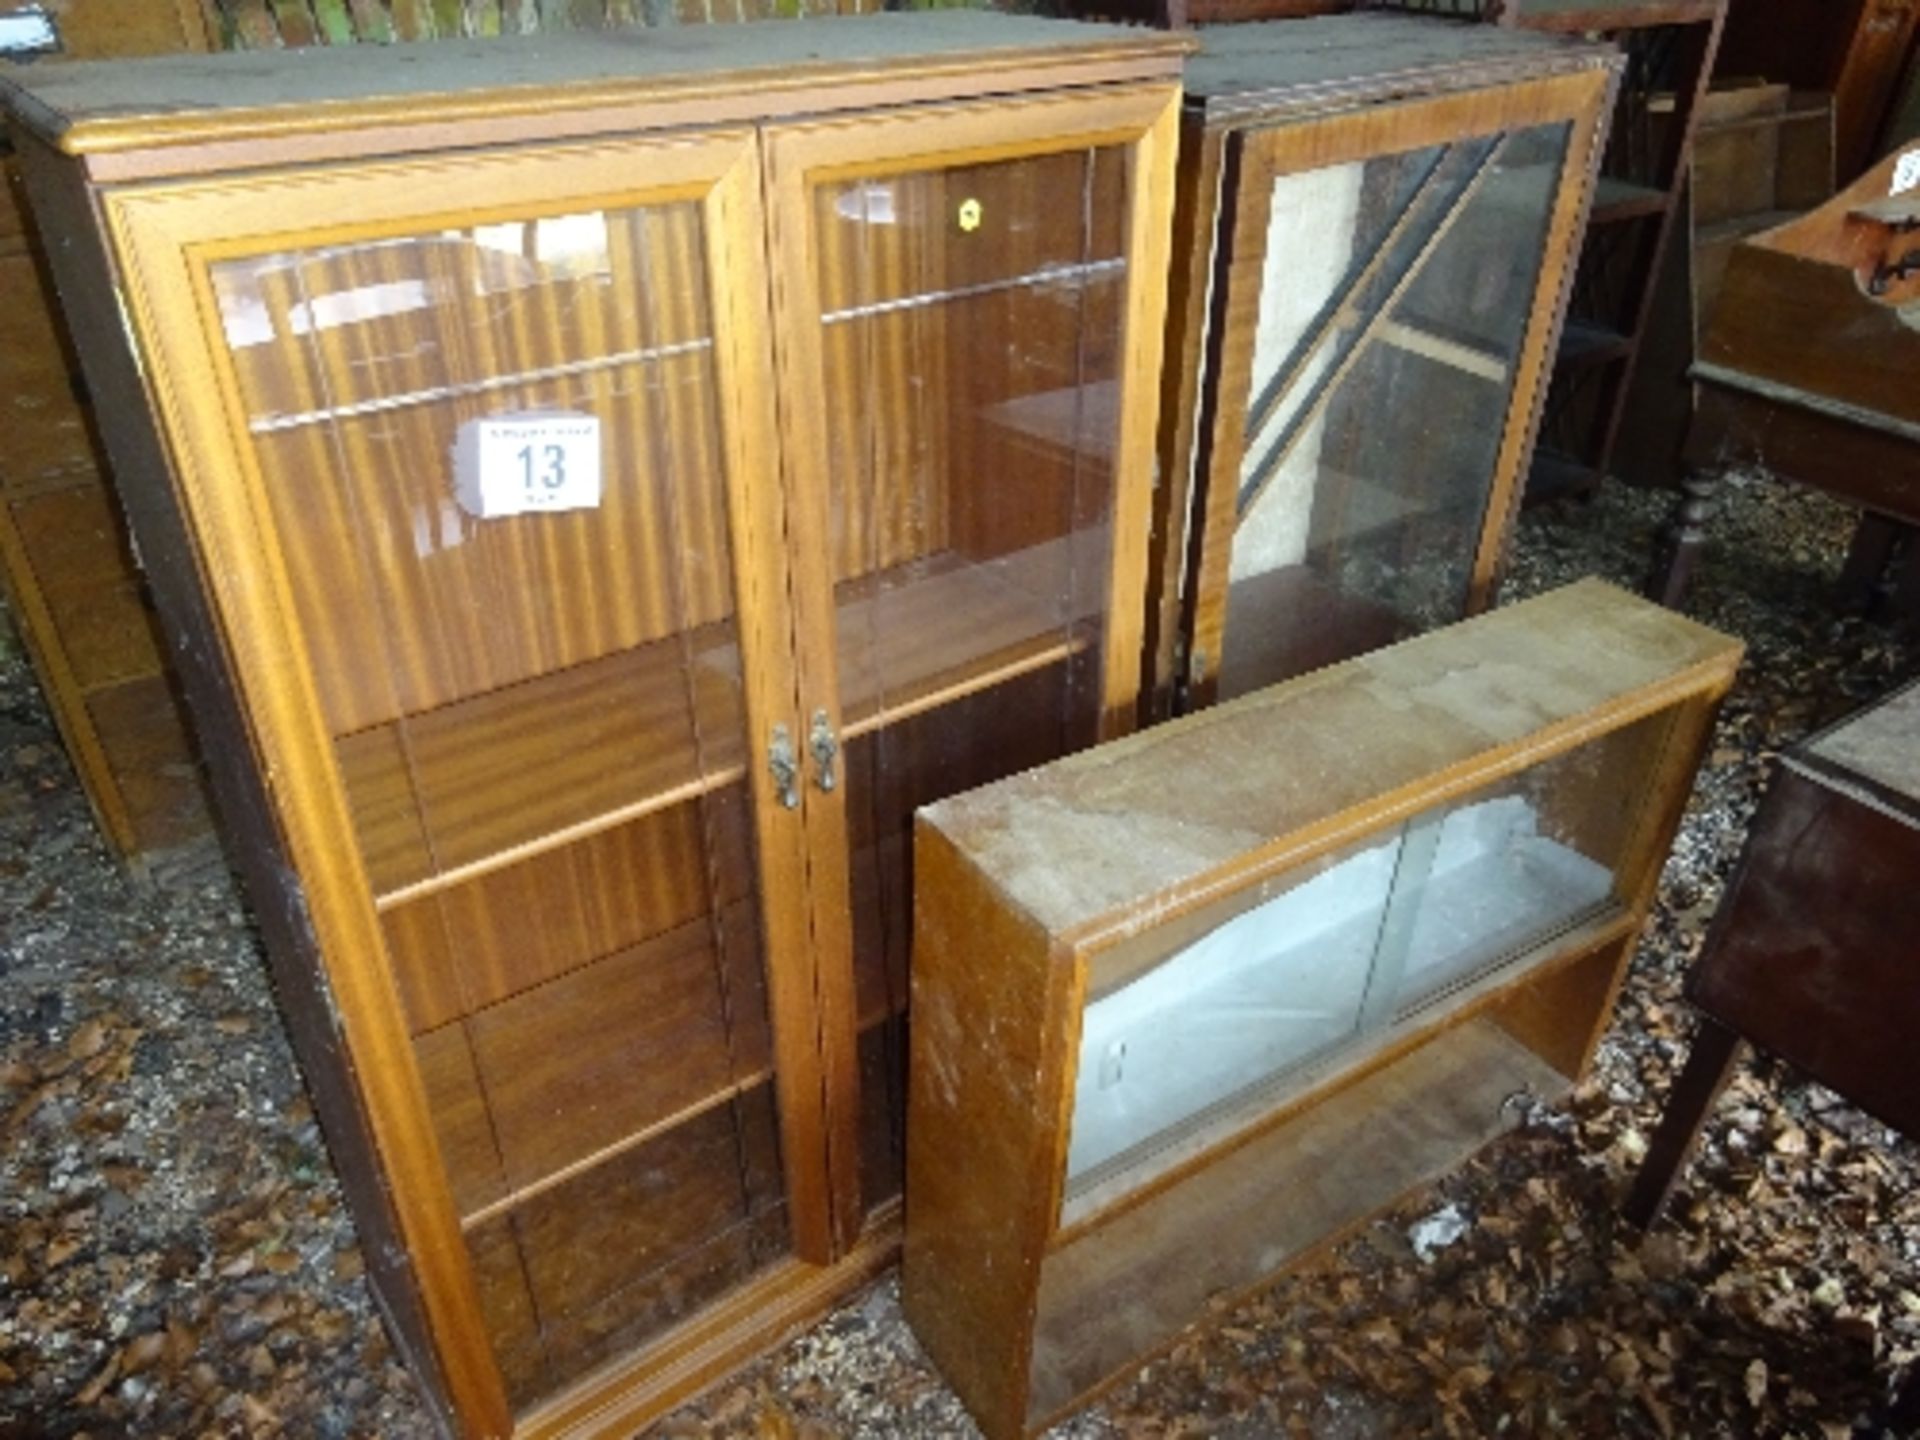 3 glass fronted display cabinets